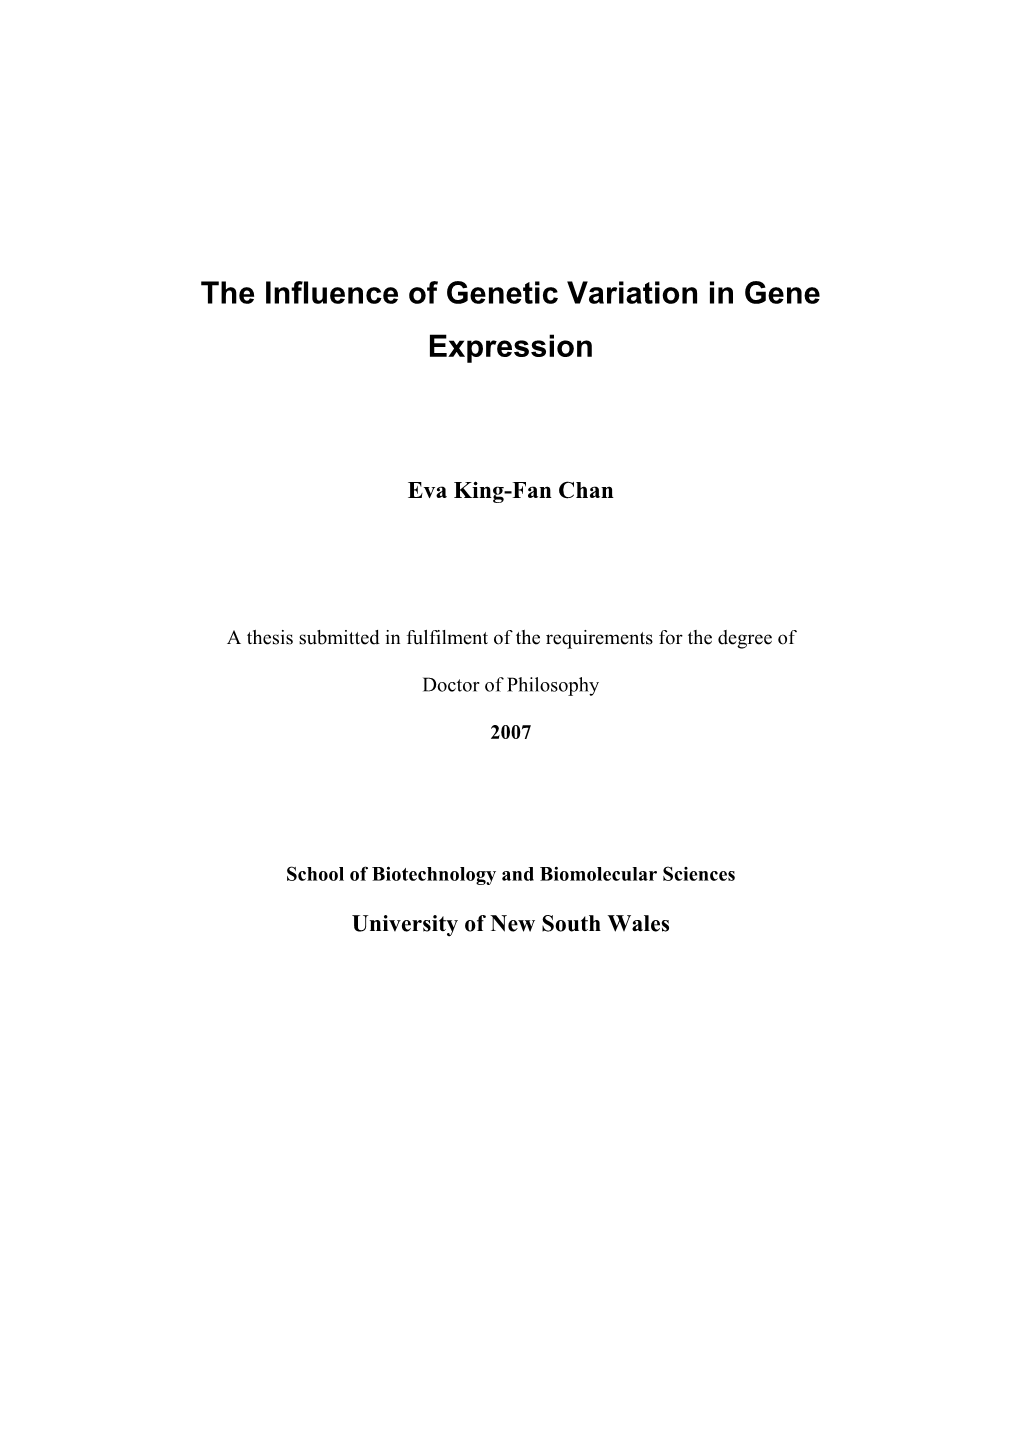 The Influence of Genetic Variation in Gene Expression